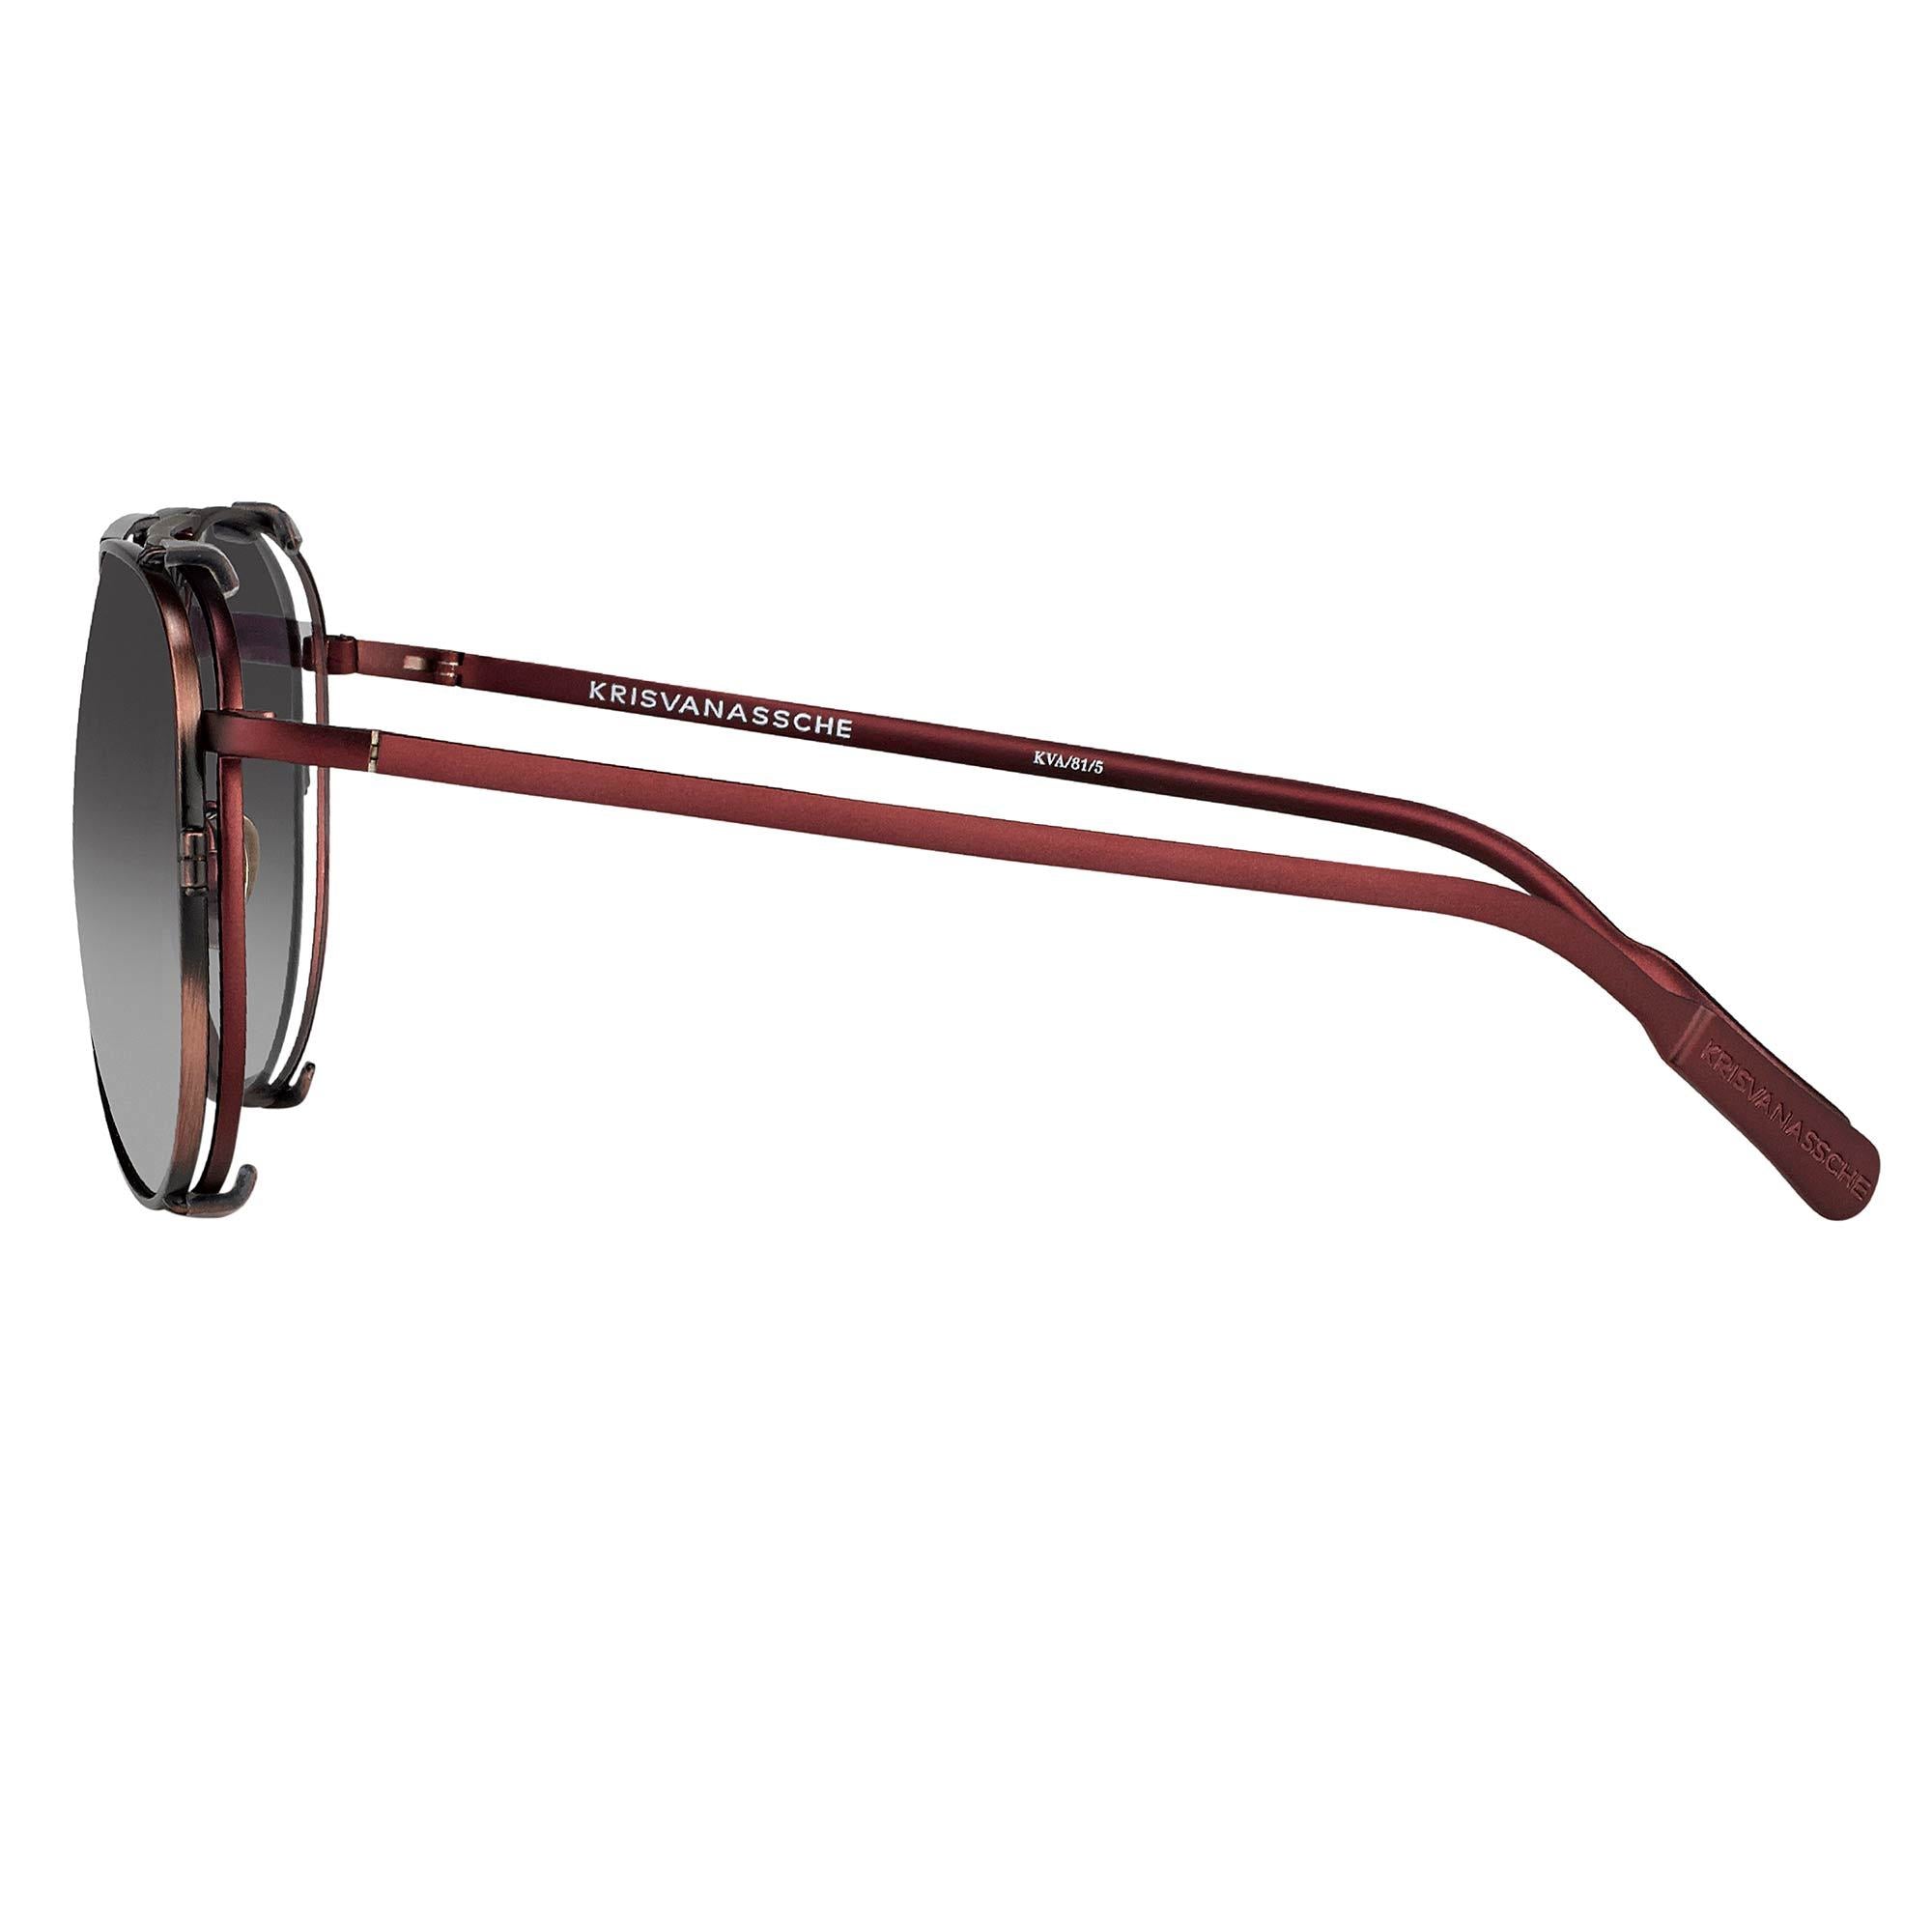 Kris Van Assche Sunglasses Unisex Red and Bronze with Green Clip-On Lenses Category 3 - KVA81C5SUN - Watches & Crystals